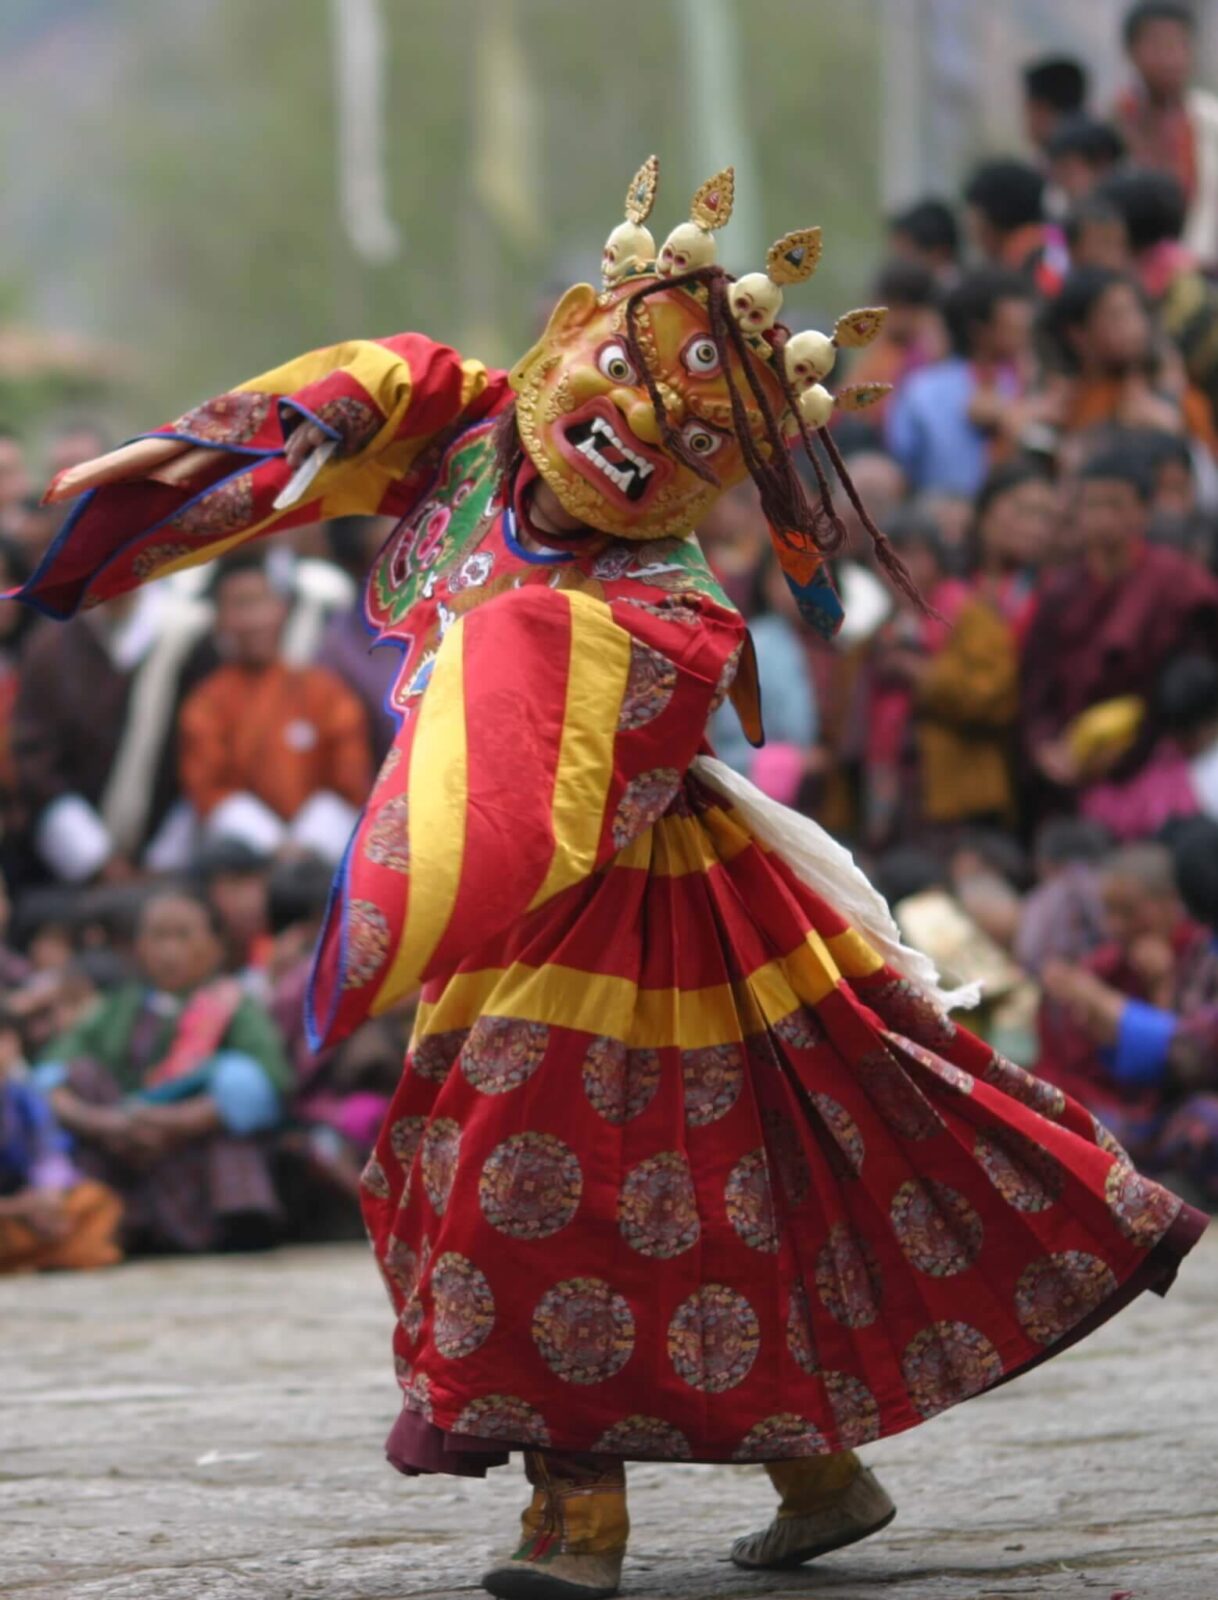 Bhutan Festival, in the Image is a masked Cham dancer